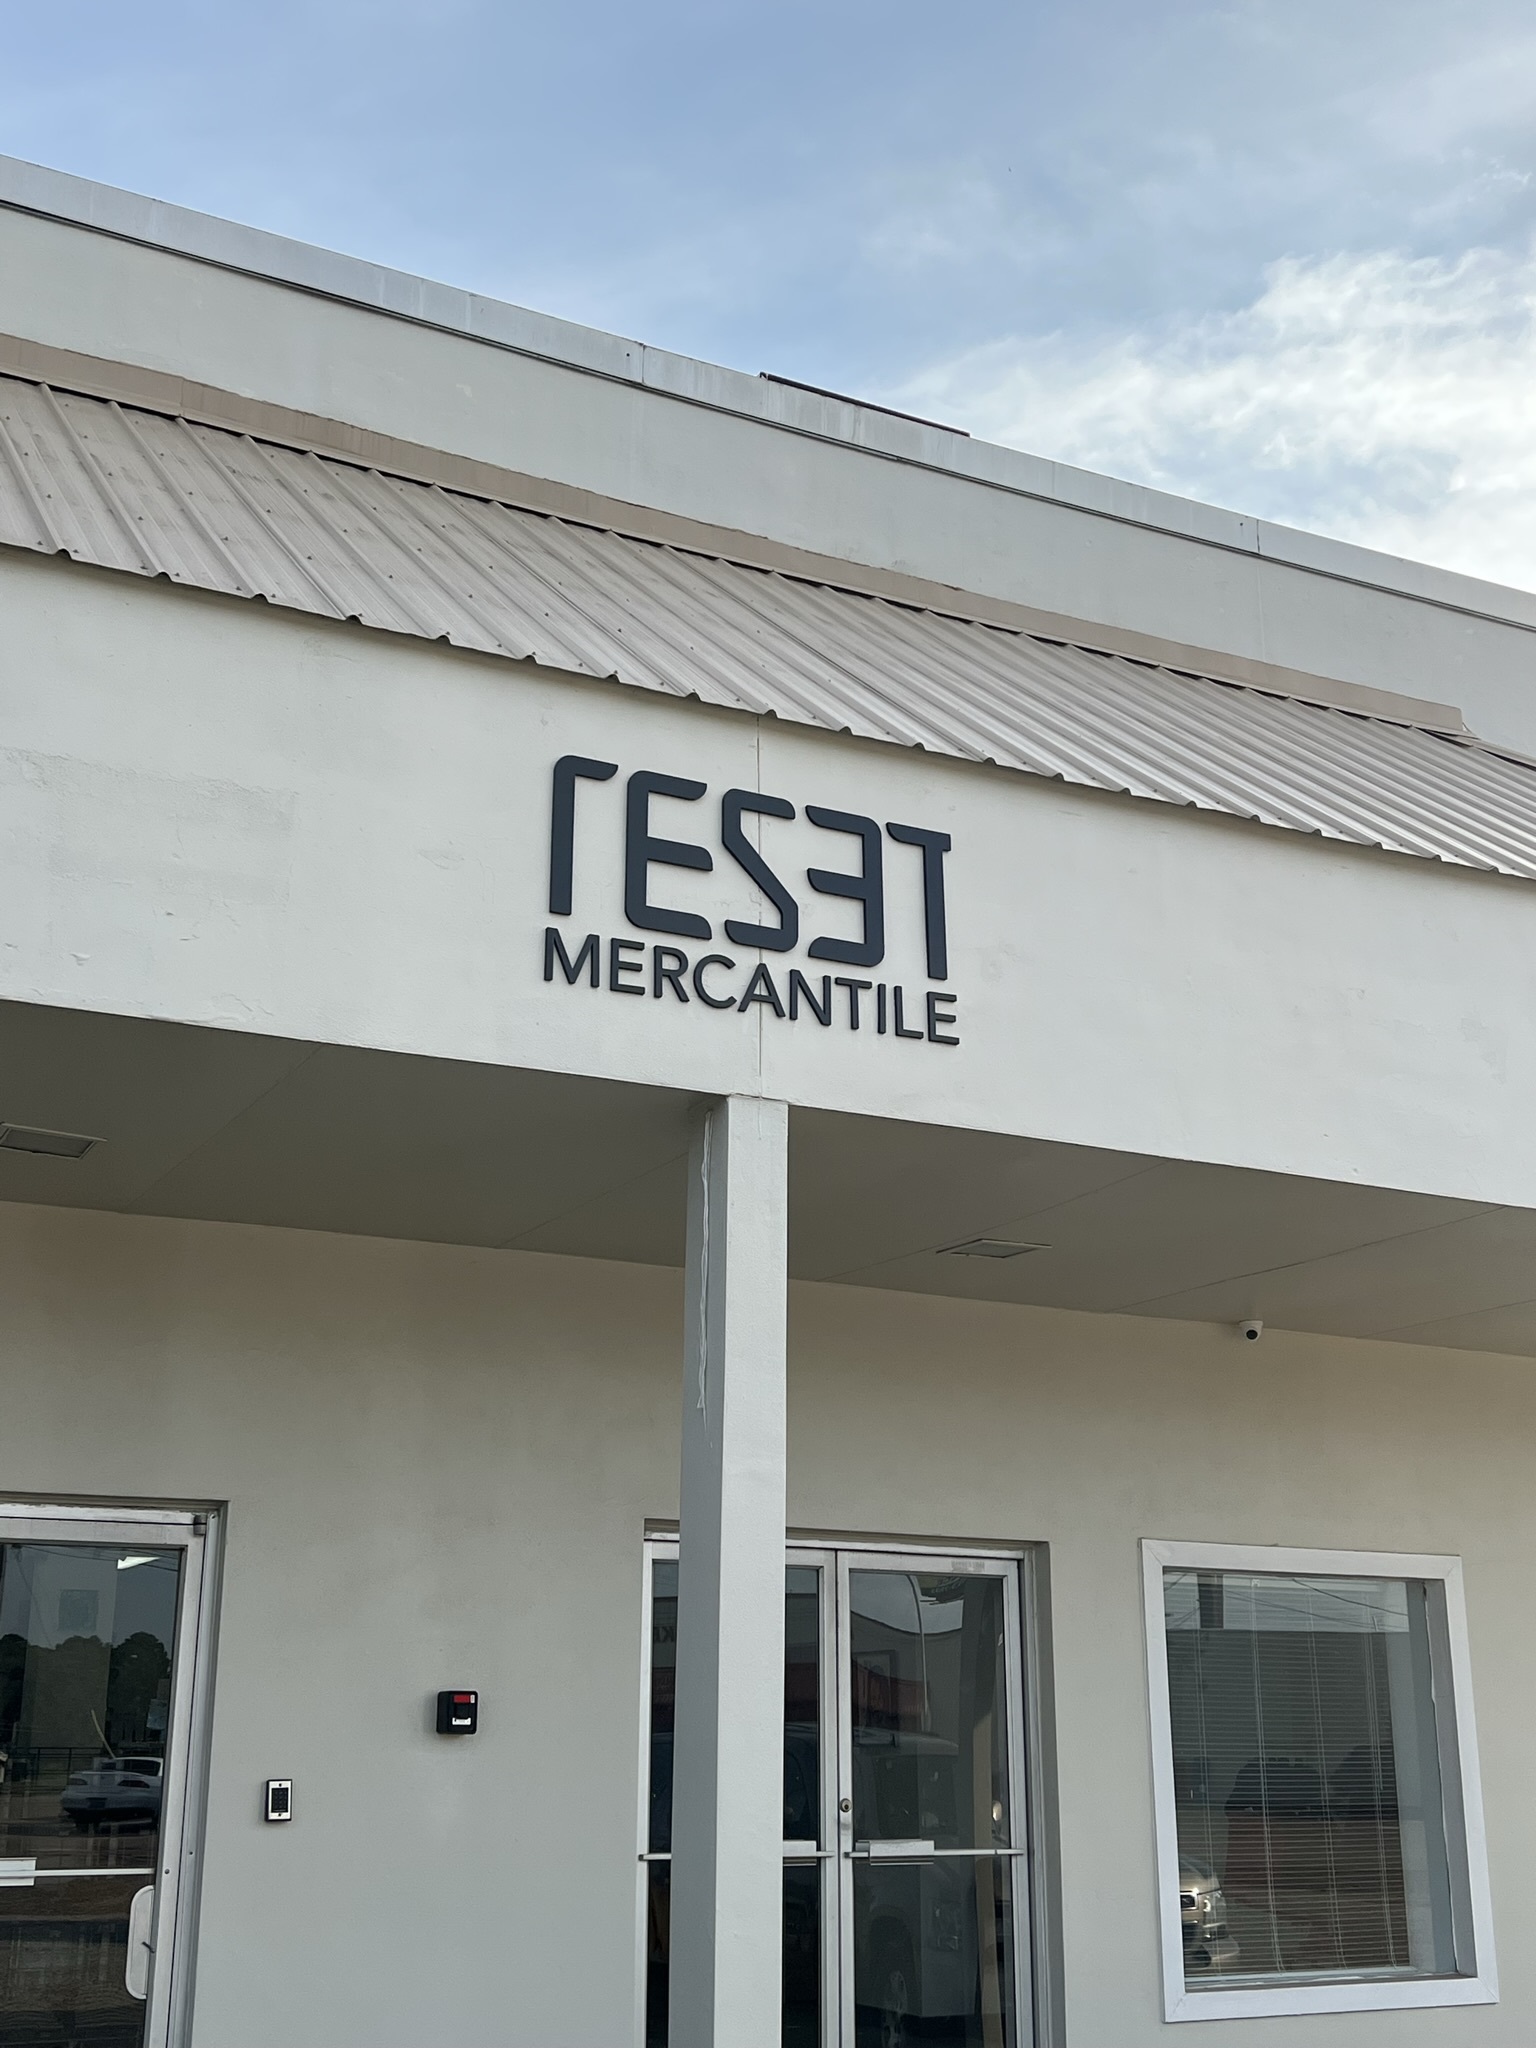 Acrylic, Stud-Mounted Letters for Reset Mercantile of Dothan, AL